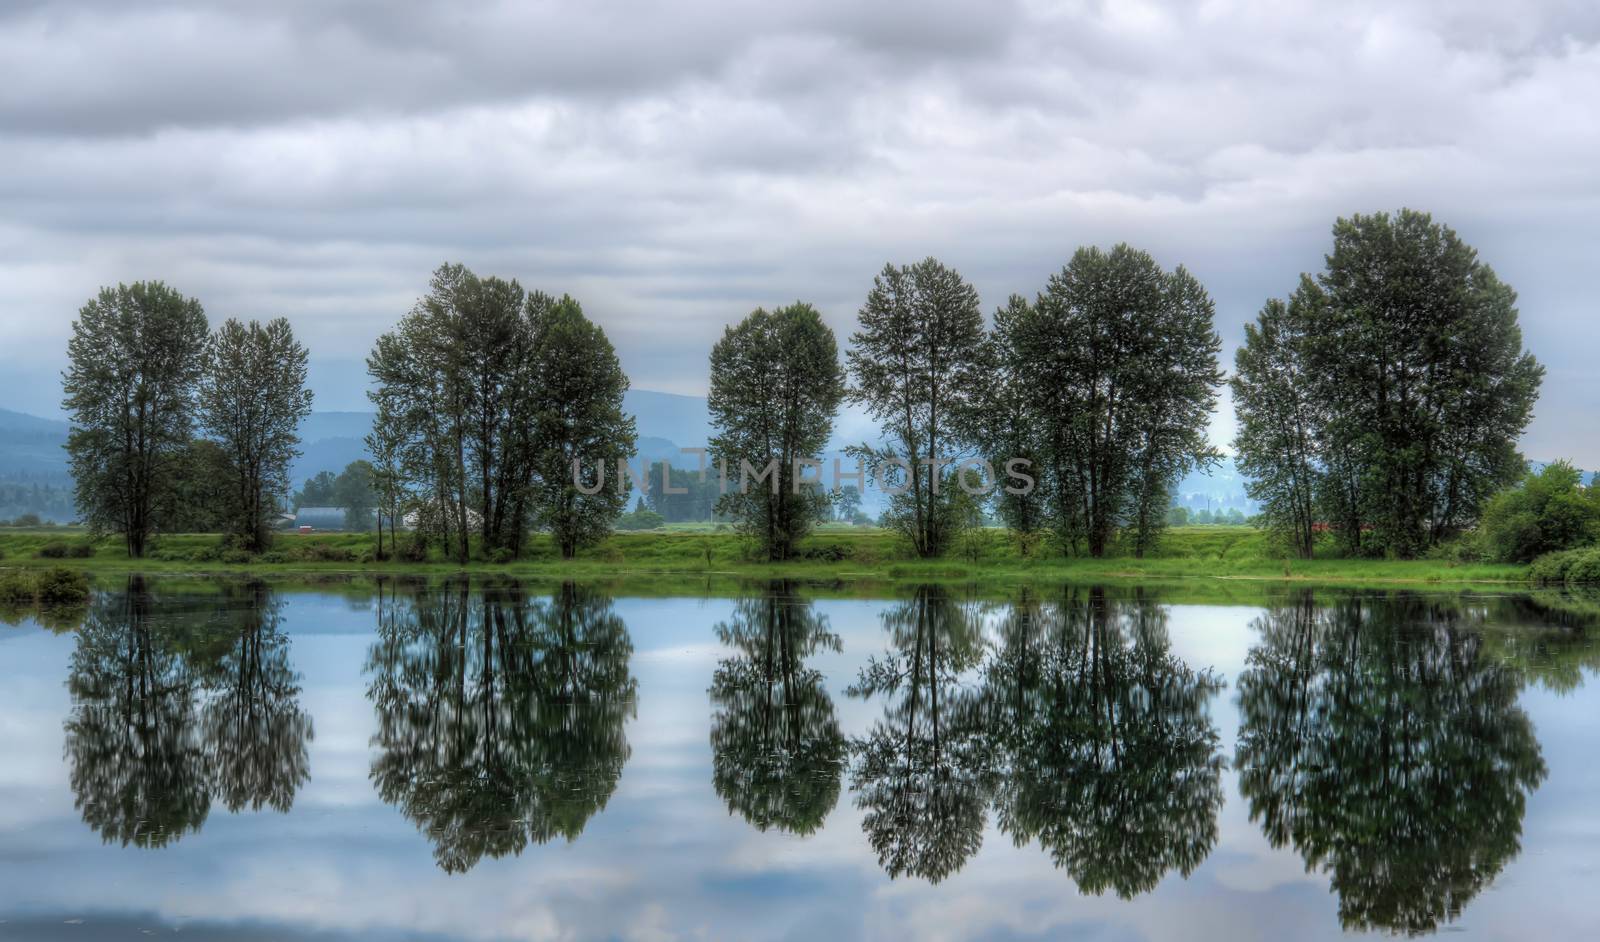 Group of Trees With Perfect Reflection in Water by JamesWheeler